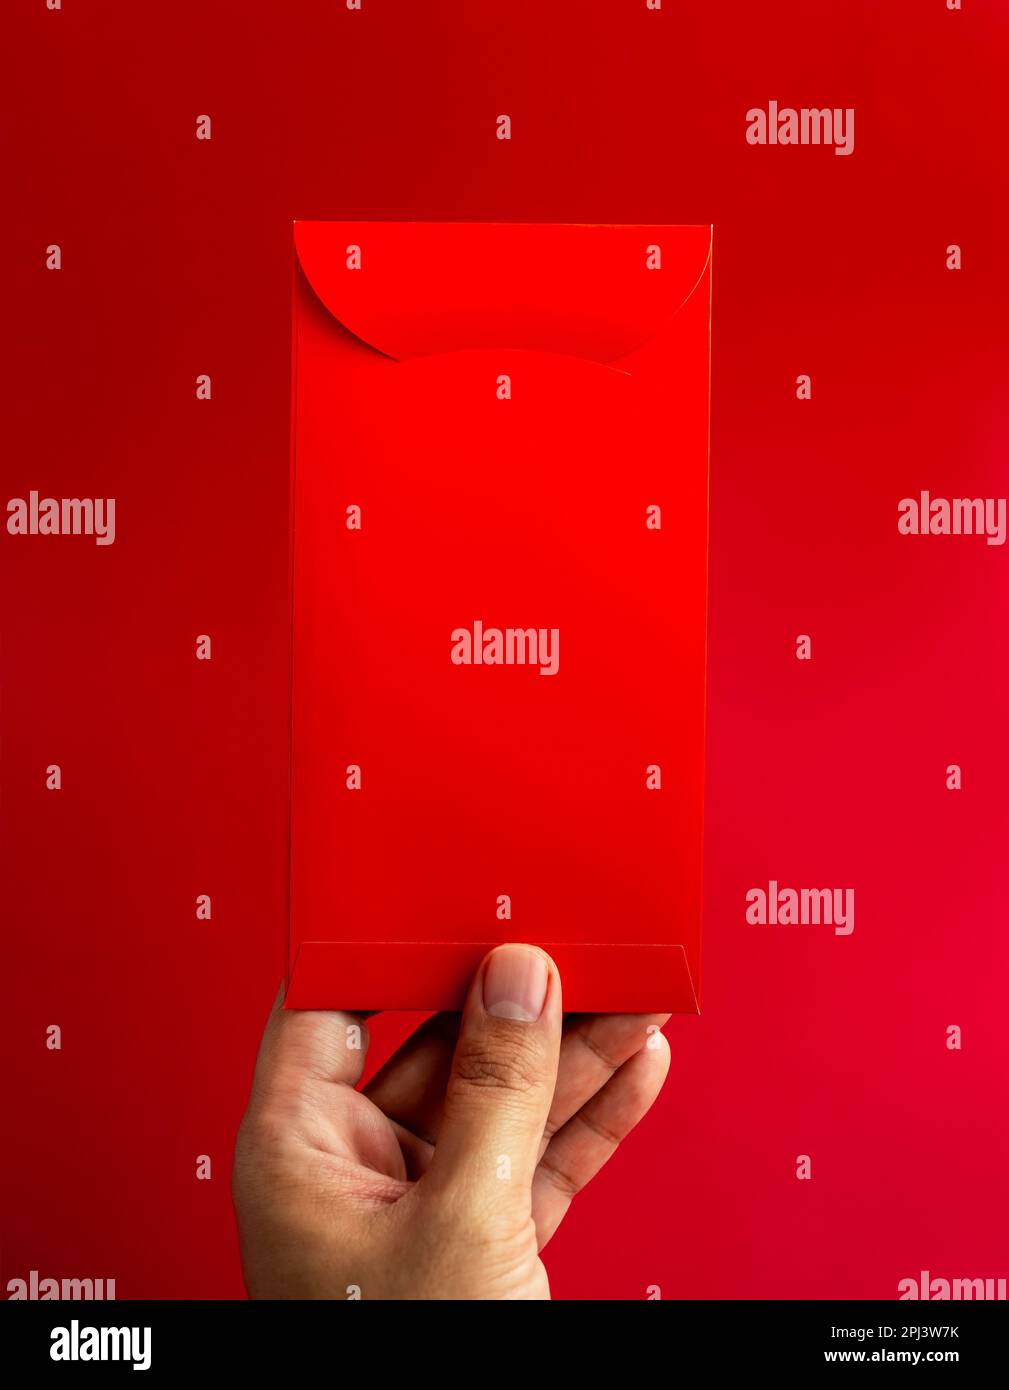 red letter day: LV ang pao  Red envelope design, Red envelope